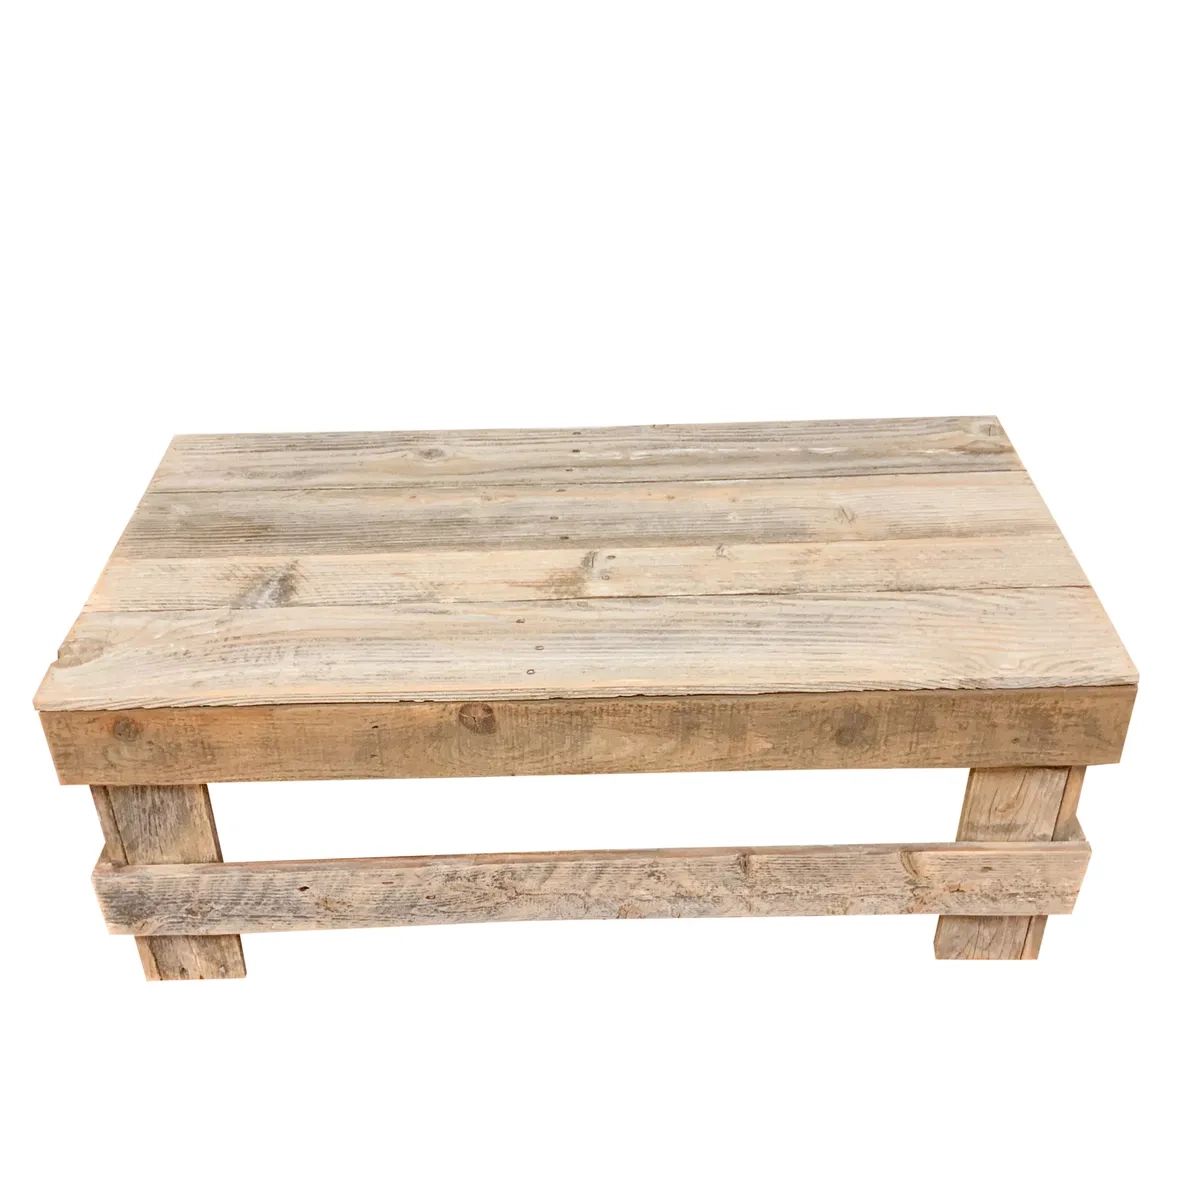 Woven Paths Reclaimed Wood Coffee Table, Natural, Free Shipping | Ebay Inside Woven Paths Coffee Tables (Photo 7 of 15)